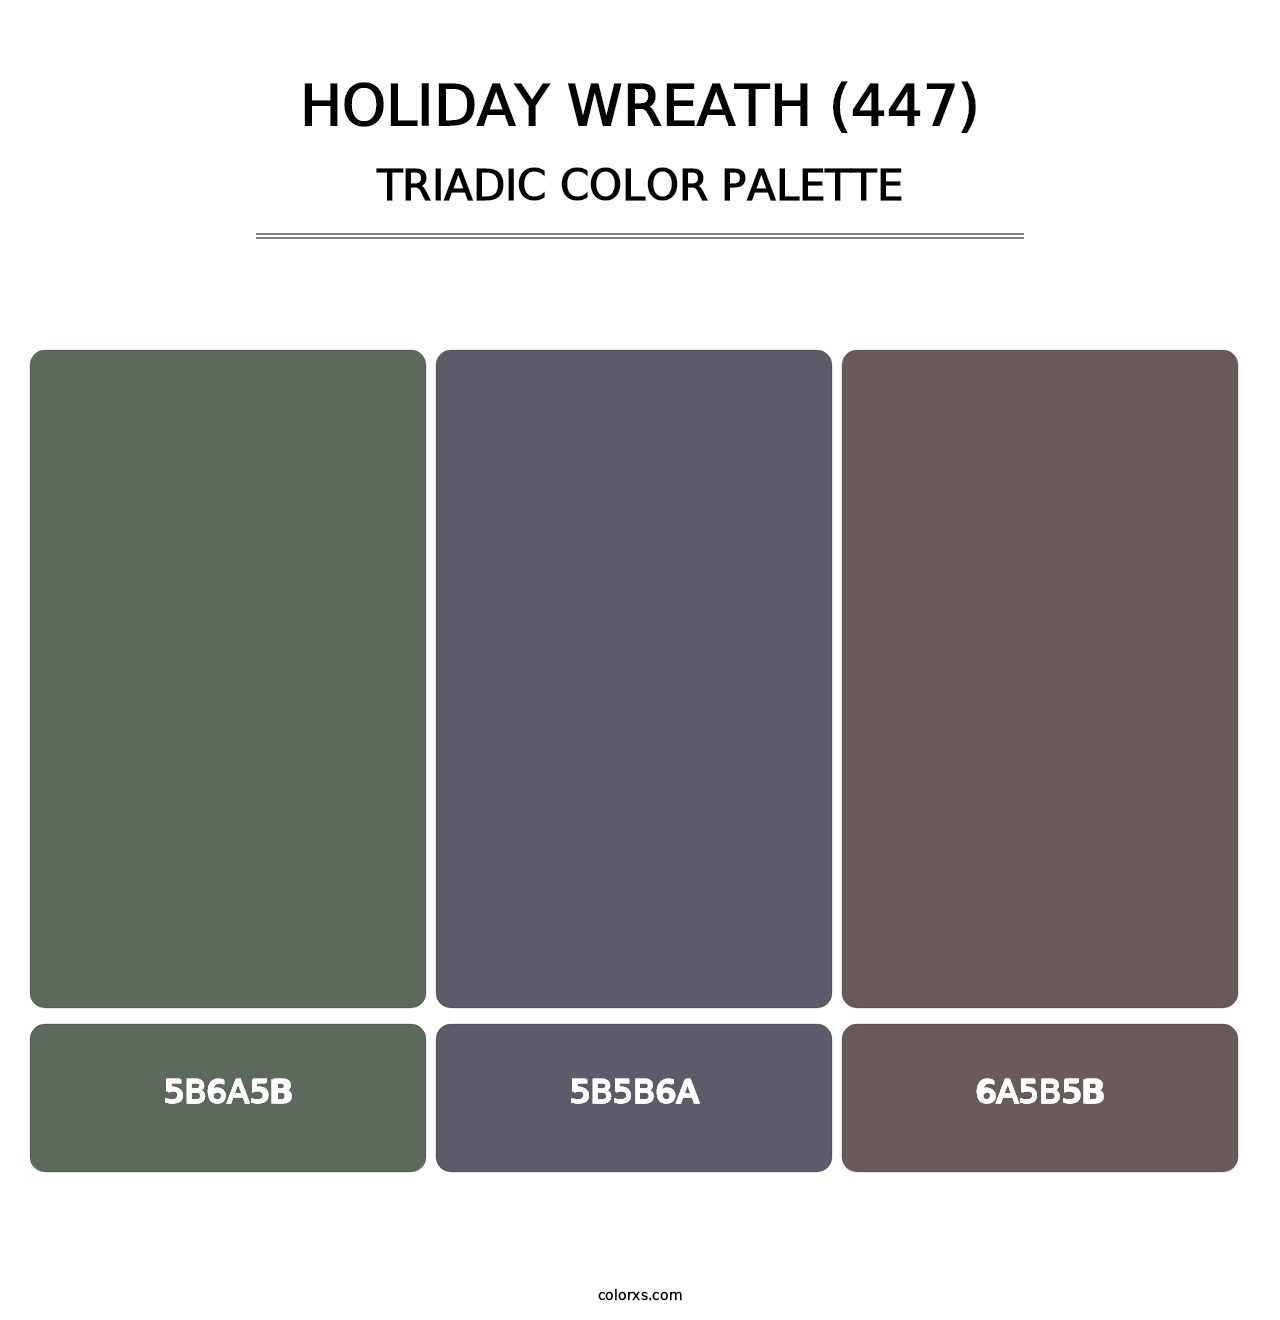 Holiday Wreath (447) - Triadic Color Palette